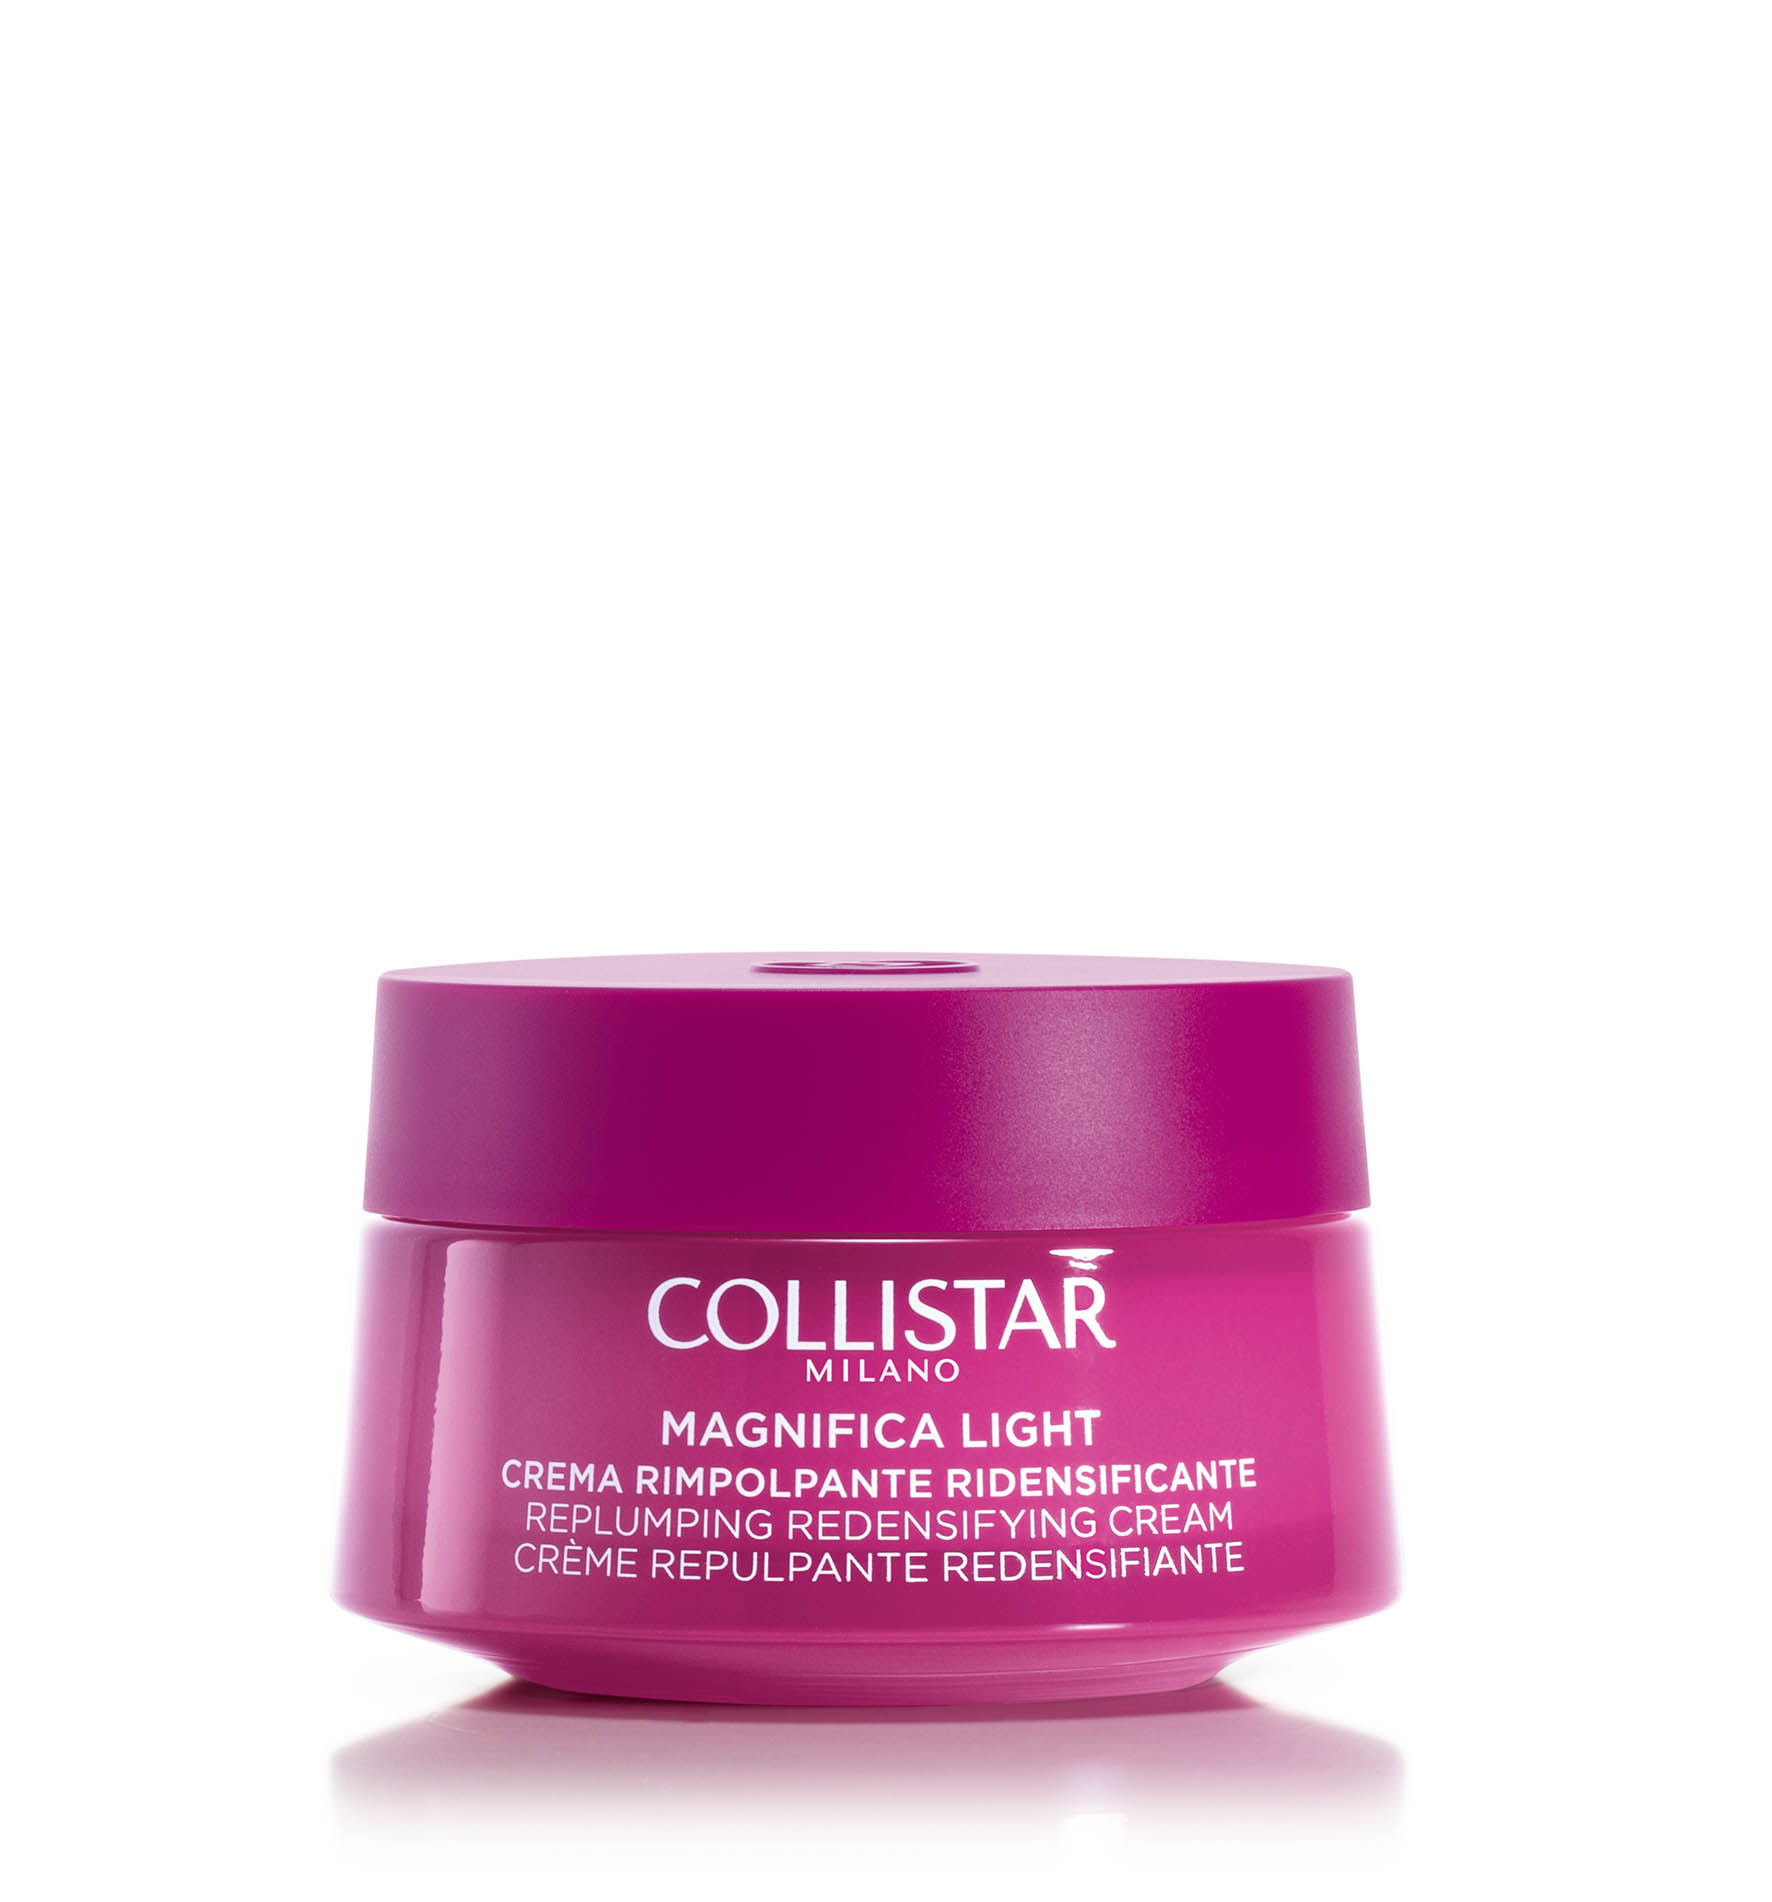 MAGNIFICA LIGHT REPLUMPING REGENERATING FACE AND NECK CREAM - Anti-age | Collistar - Shop Online Ufficiale